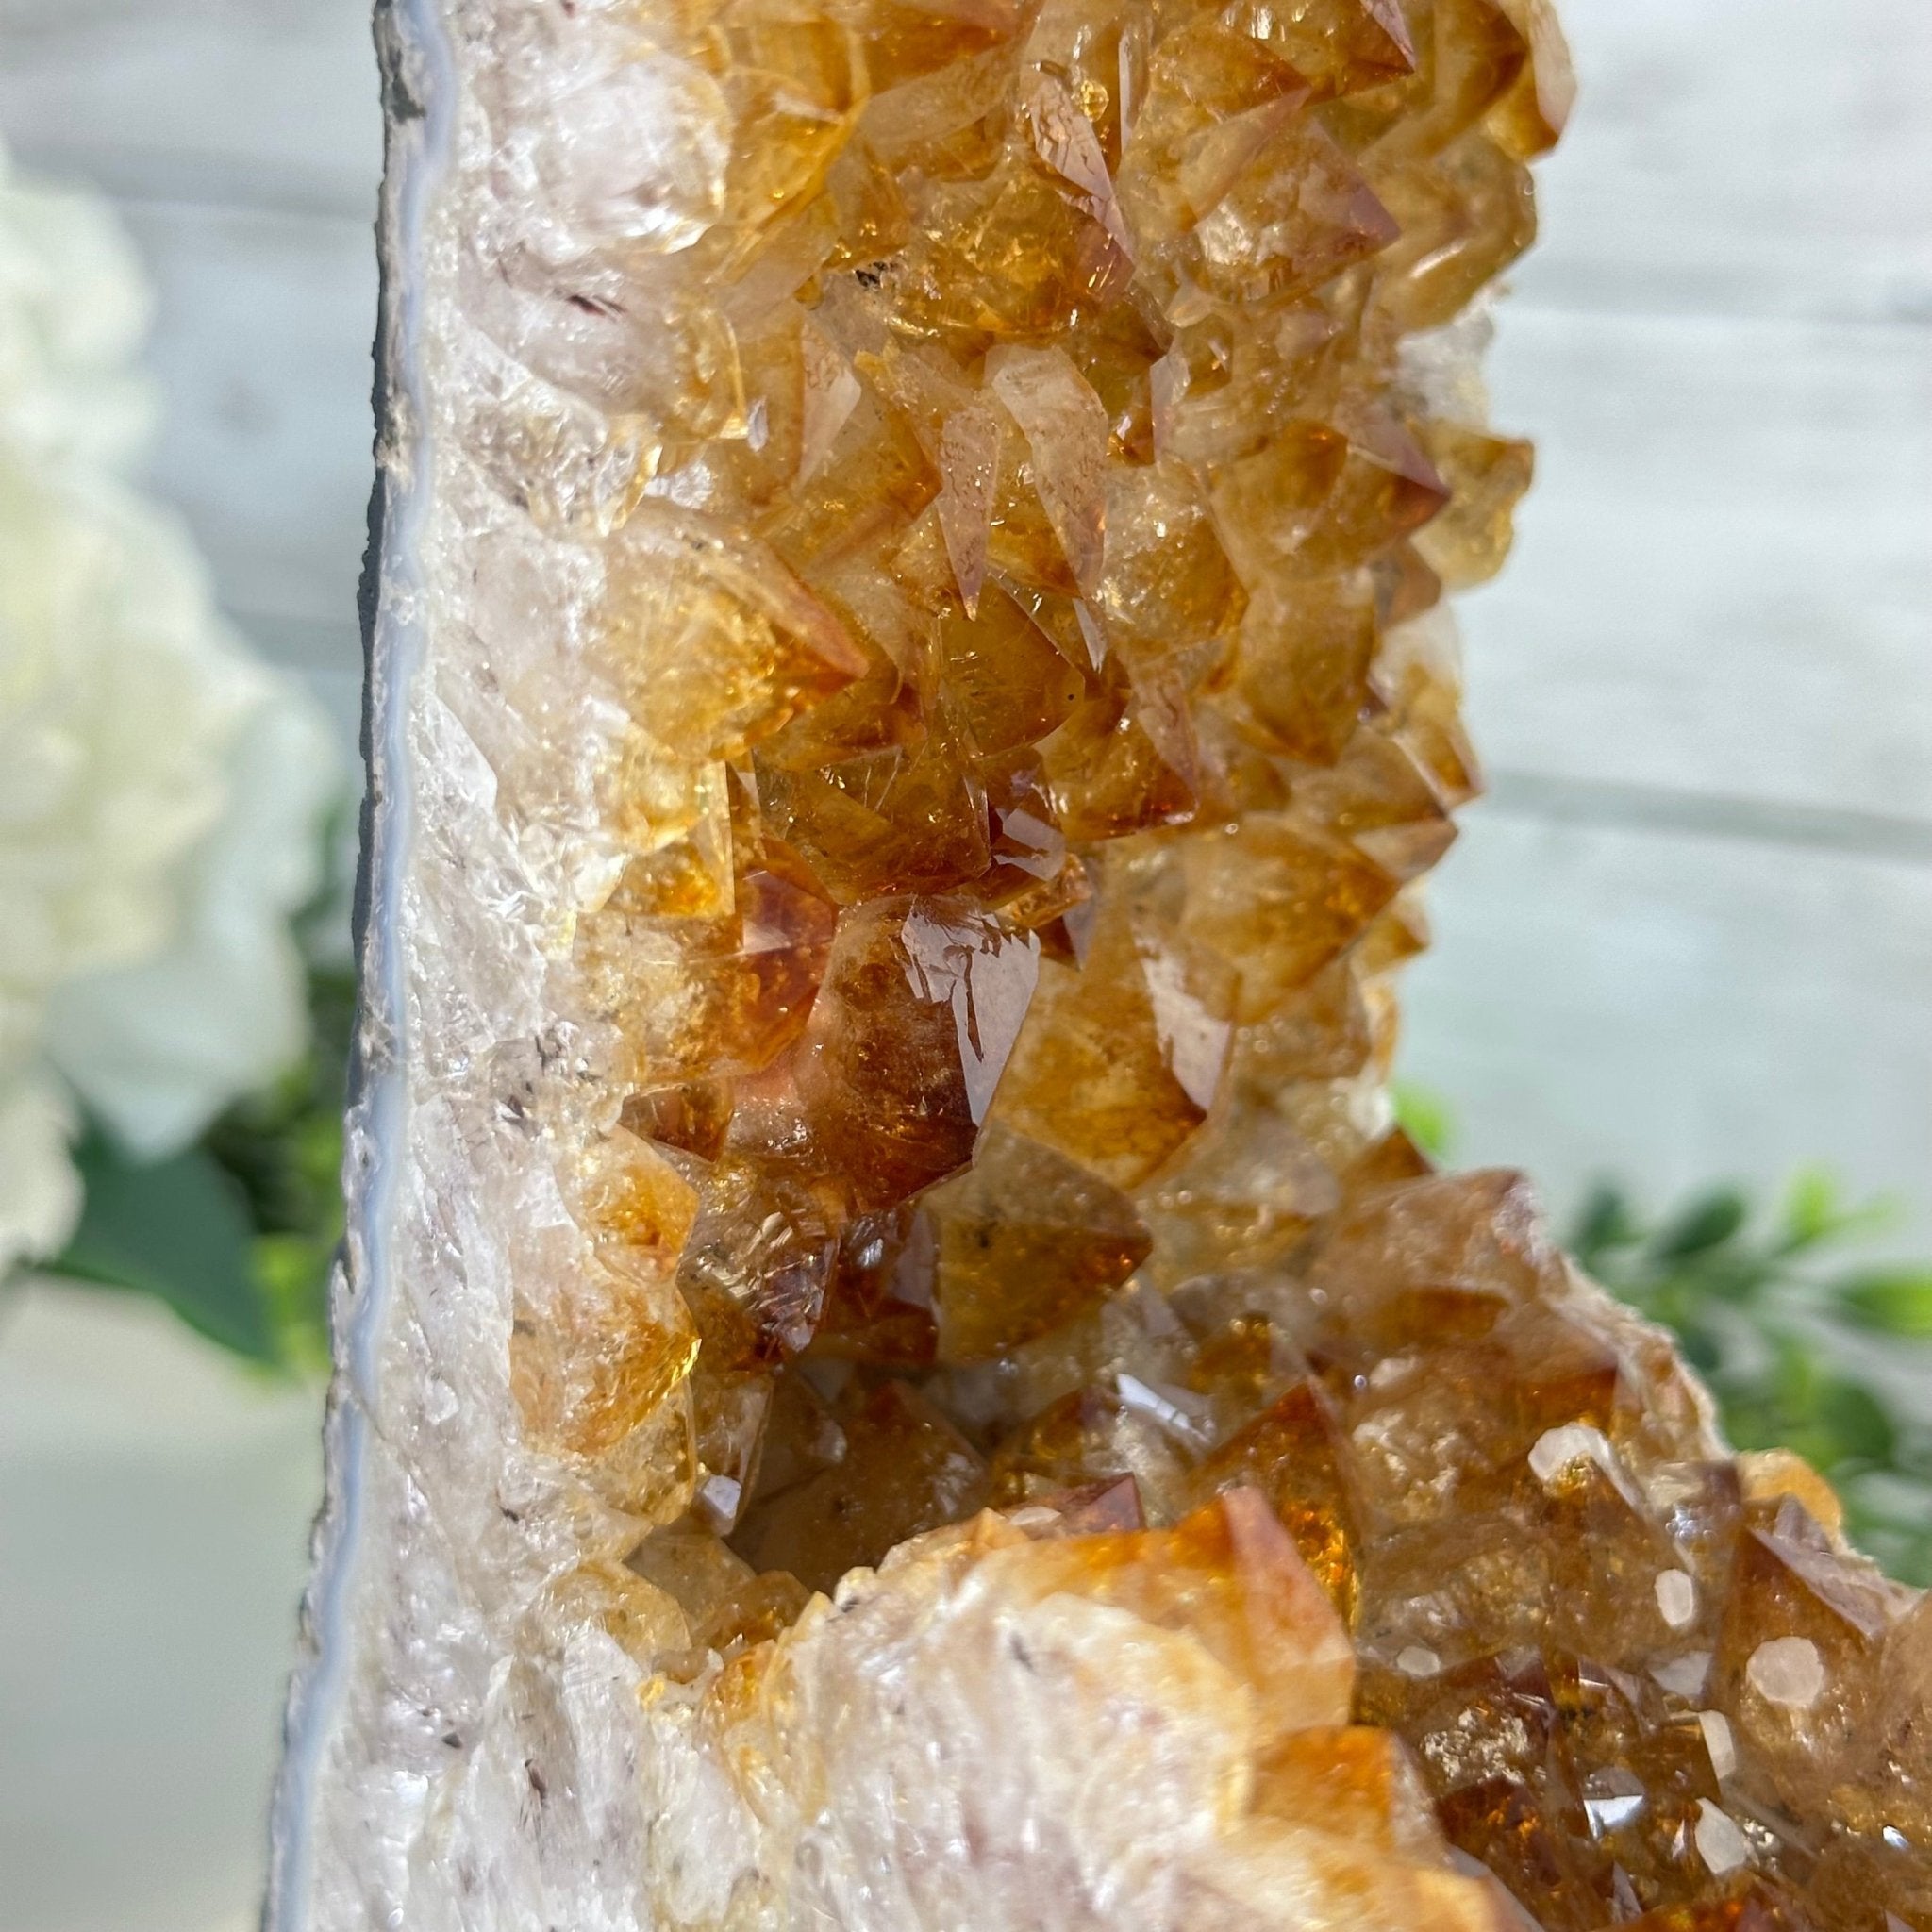 Quality Open 2 - Sided Citrine Cathedral, 16 lbs and 15.7" Tall #5608 - 0041 - Brazil GemsBrazil GemsQuality Open 2 - Sided Citrine Cathedral, 16 lbs and 15.7" Tall #5608 - 0041Open 2 - Sided Cathedrals5608 - 0041